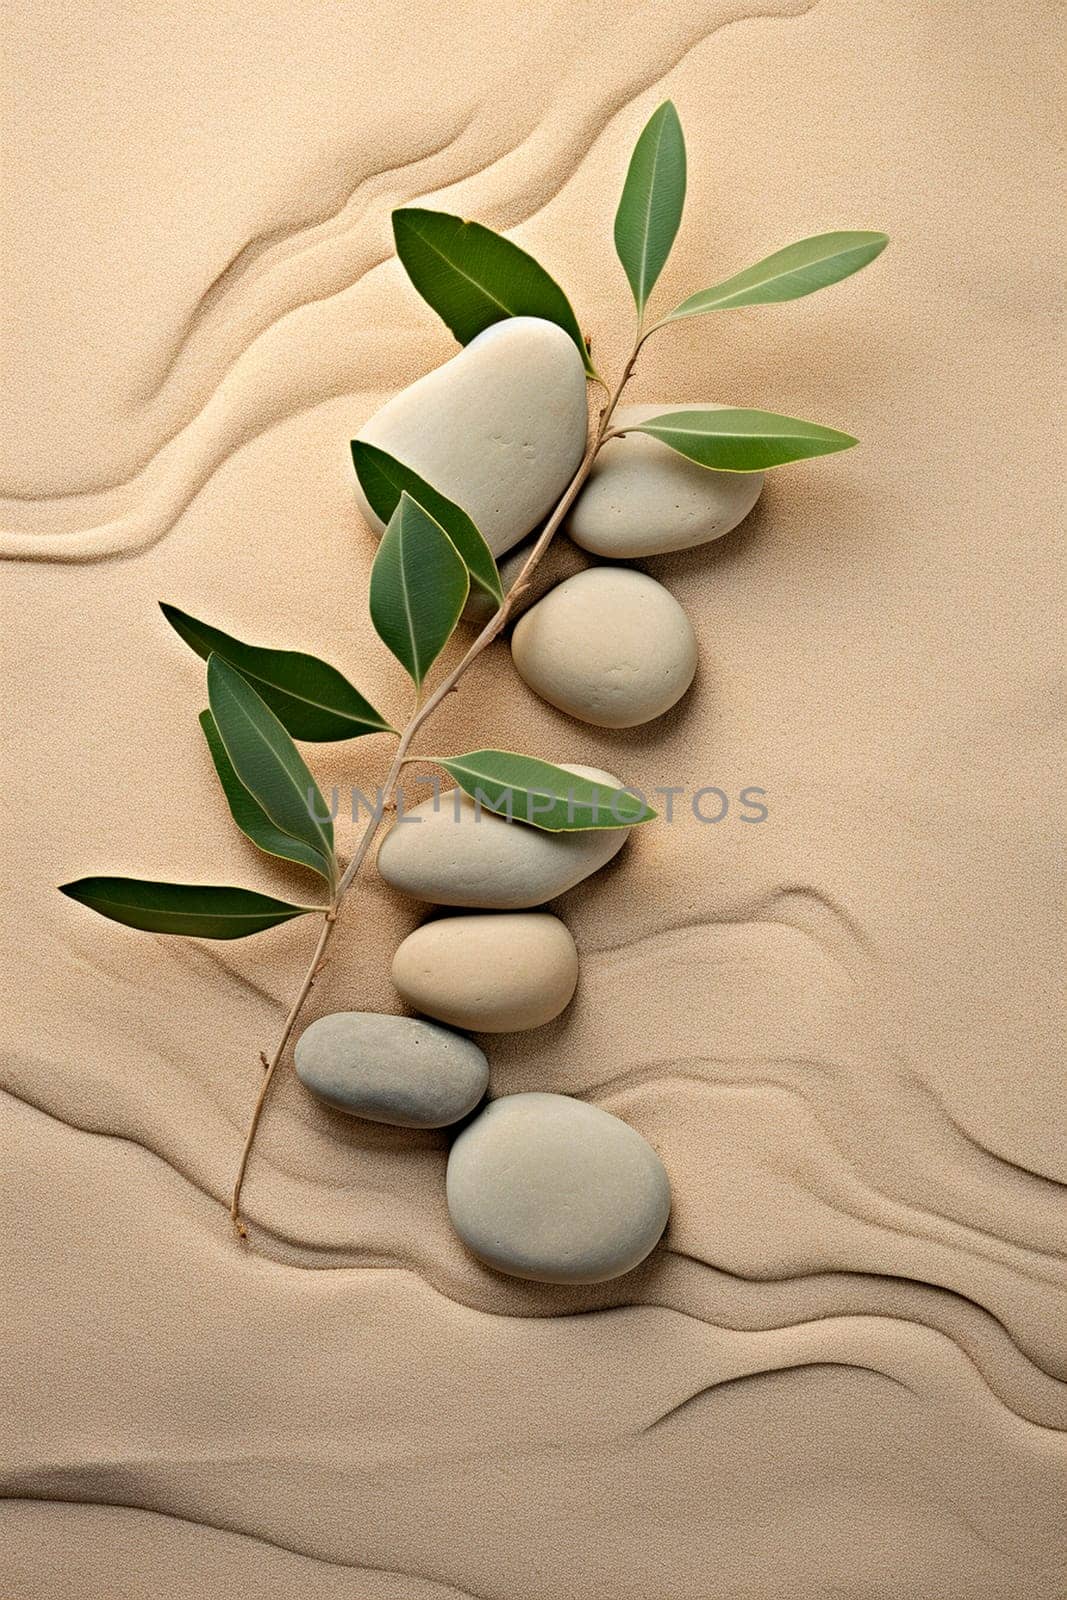 Smooth stones and spa plant. Selective focus. Nature.